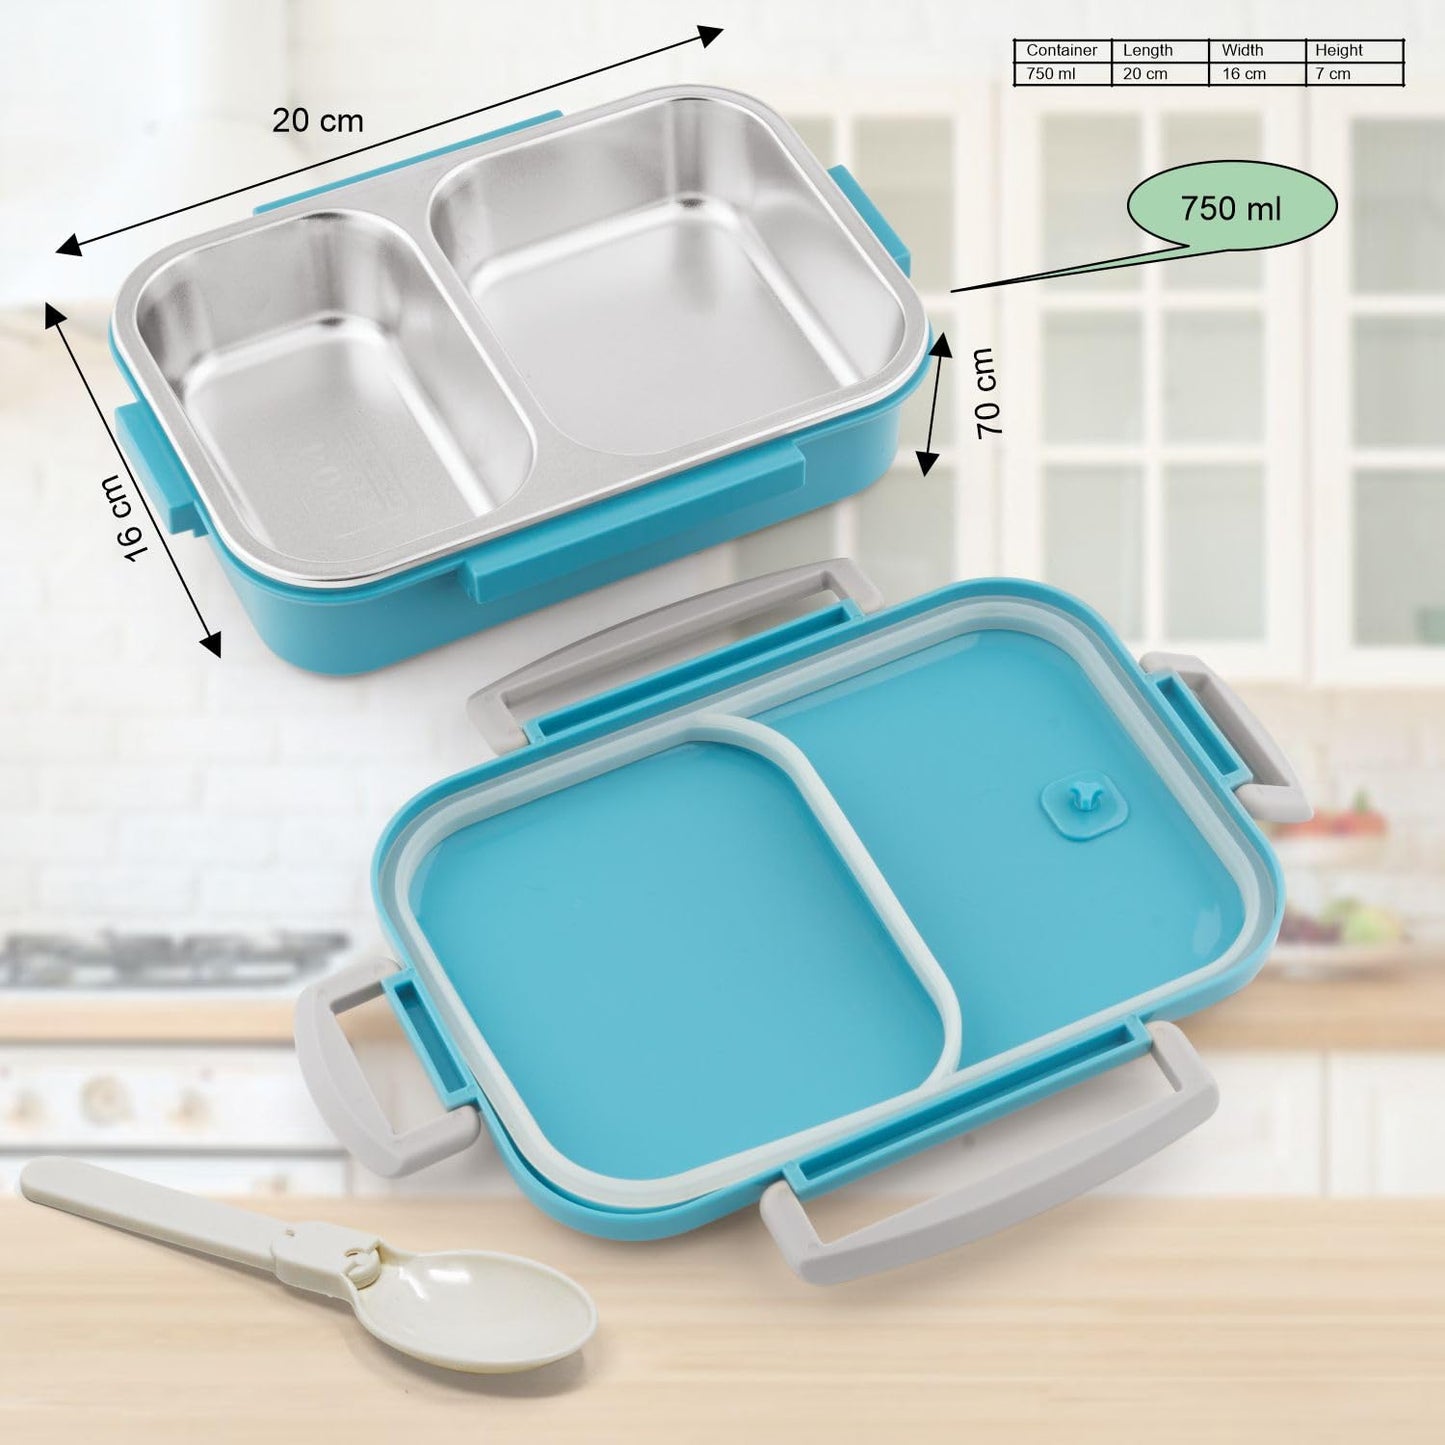 Signoraware Eat Up Steel Stainless Steel Lunch Box